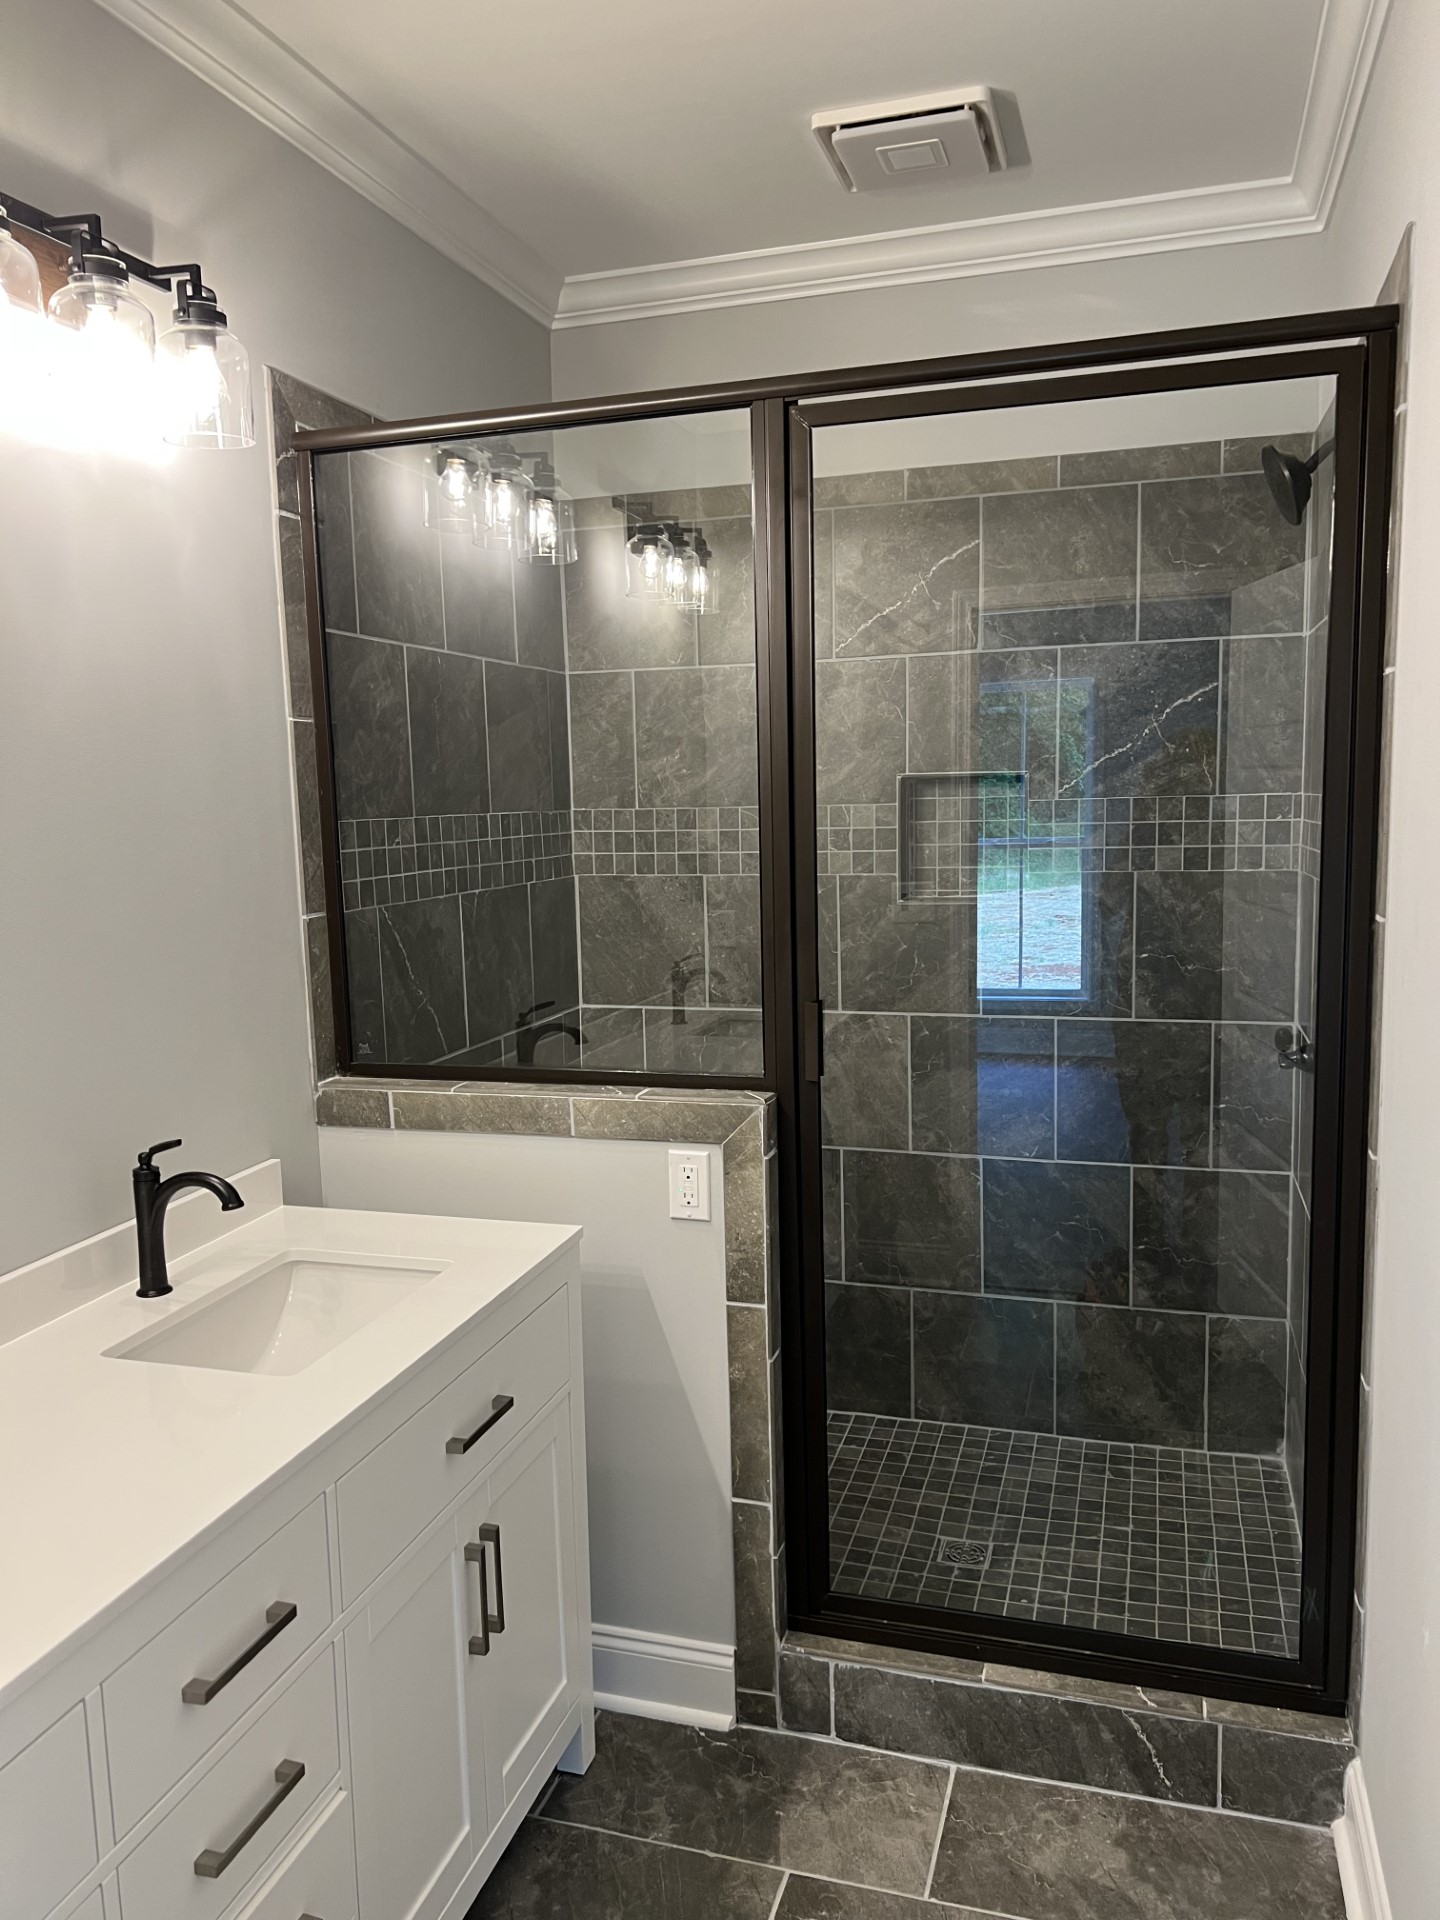 Shower Doors | Advance Home Specialty | Byron, GA